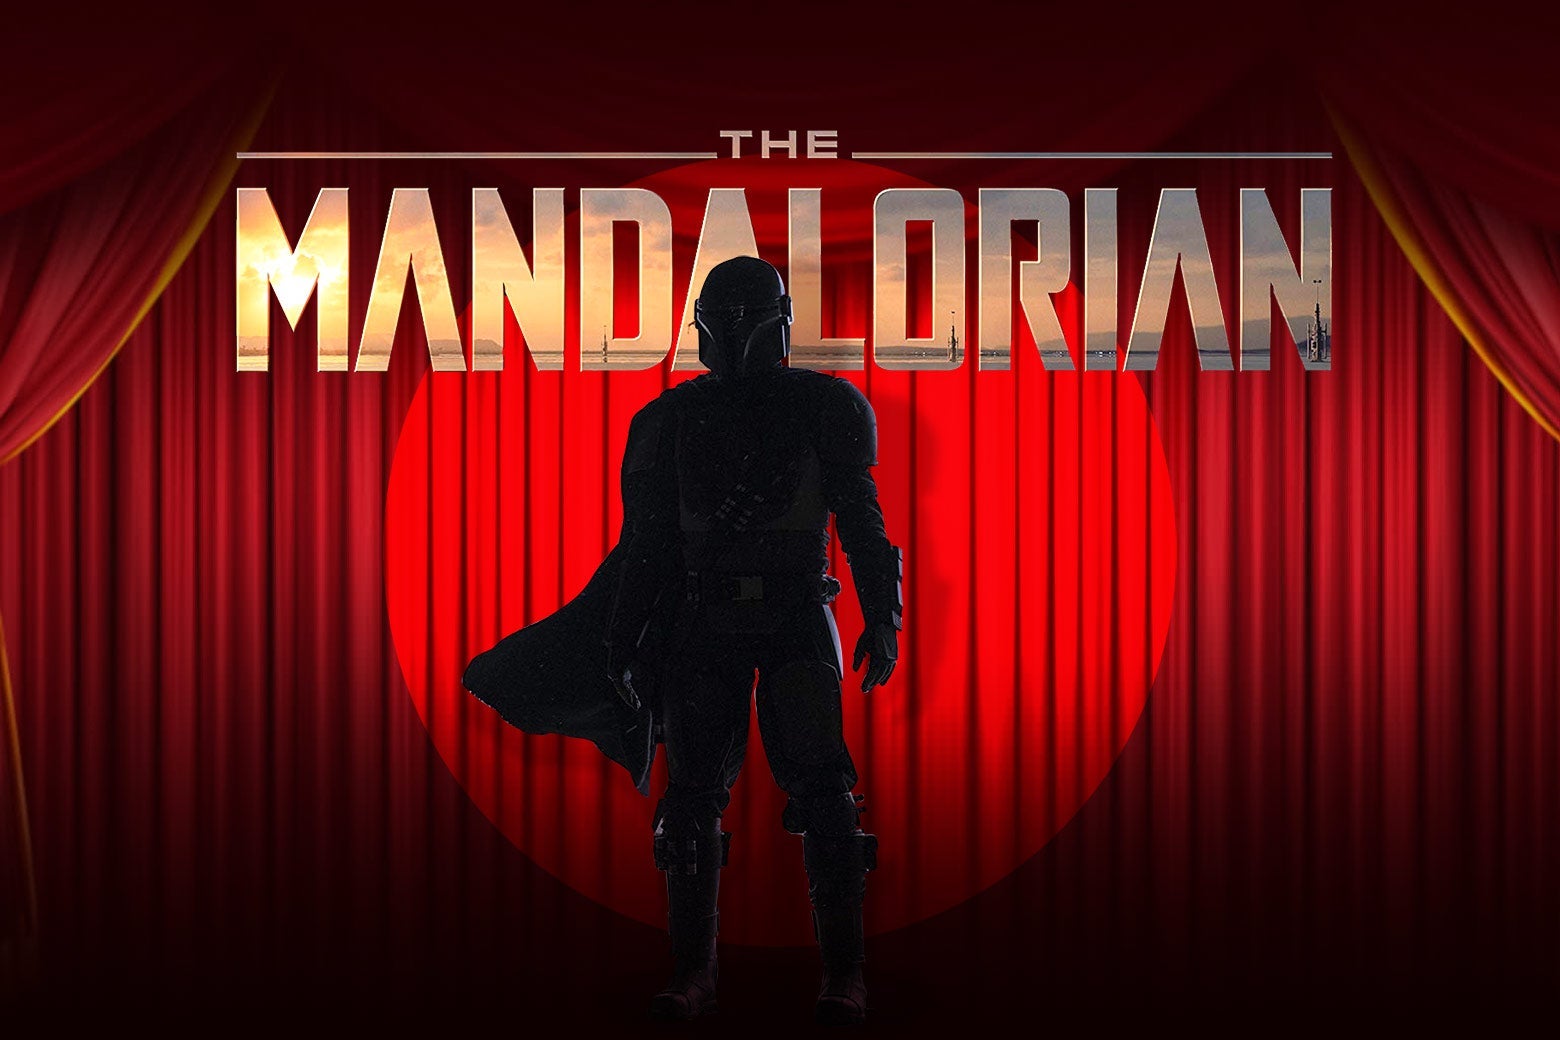 The Mandalorian onstage in a spotlight in front of a red curtain.